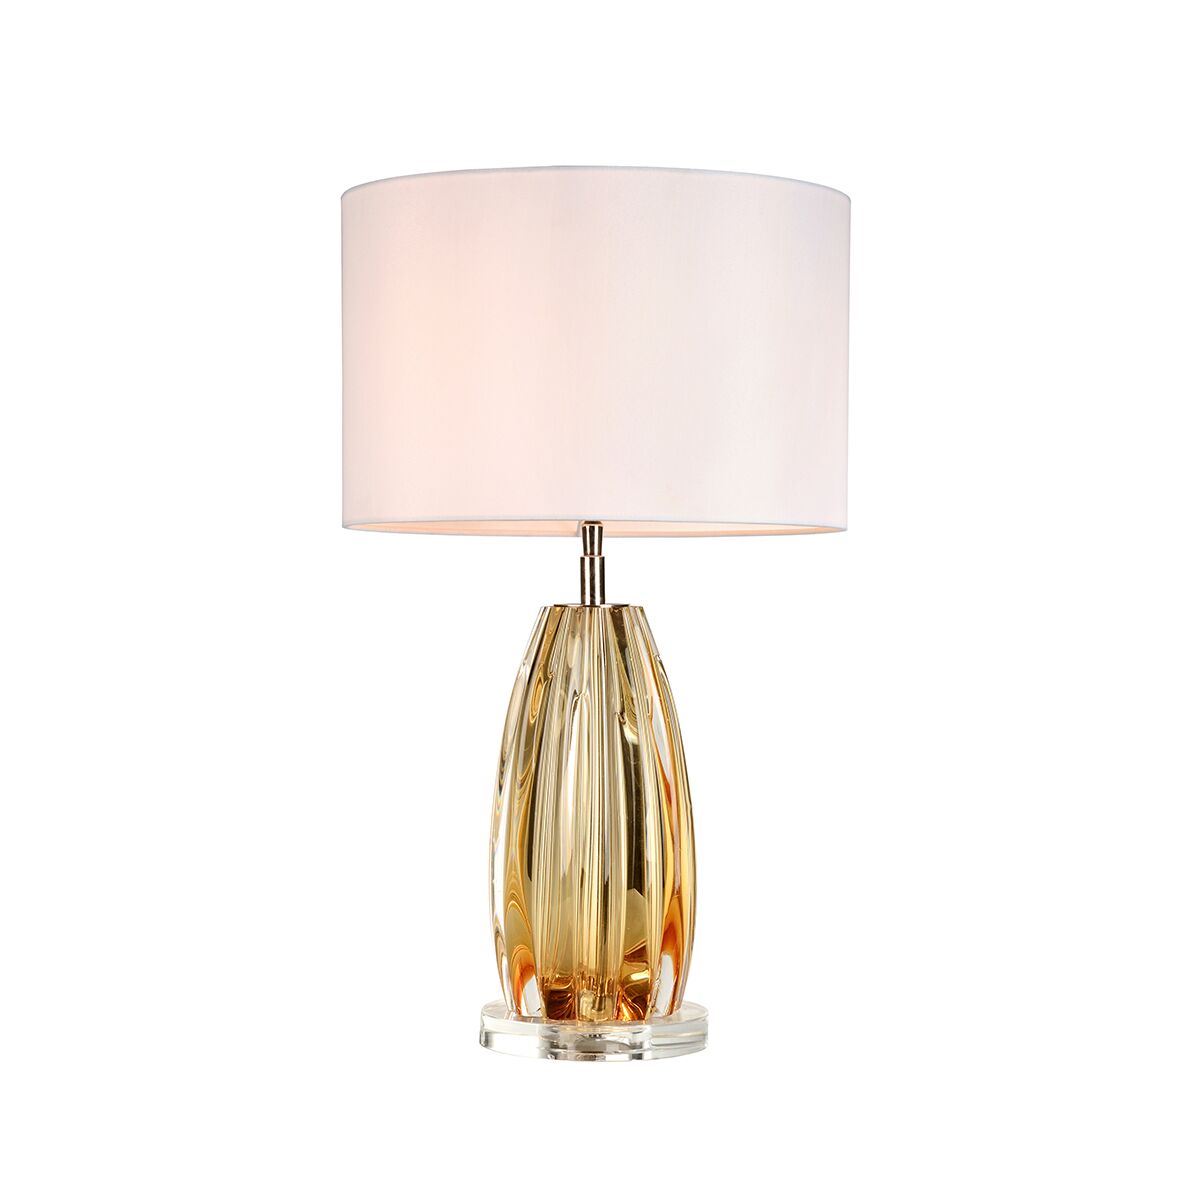 Tlg3119 Cognac Amber Finished Glass Accent Table Lamp